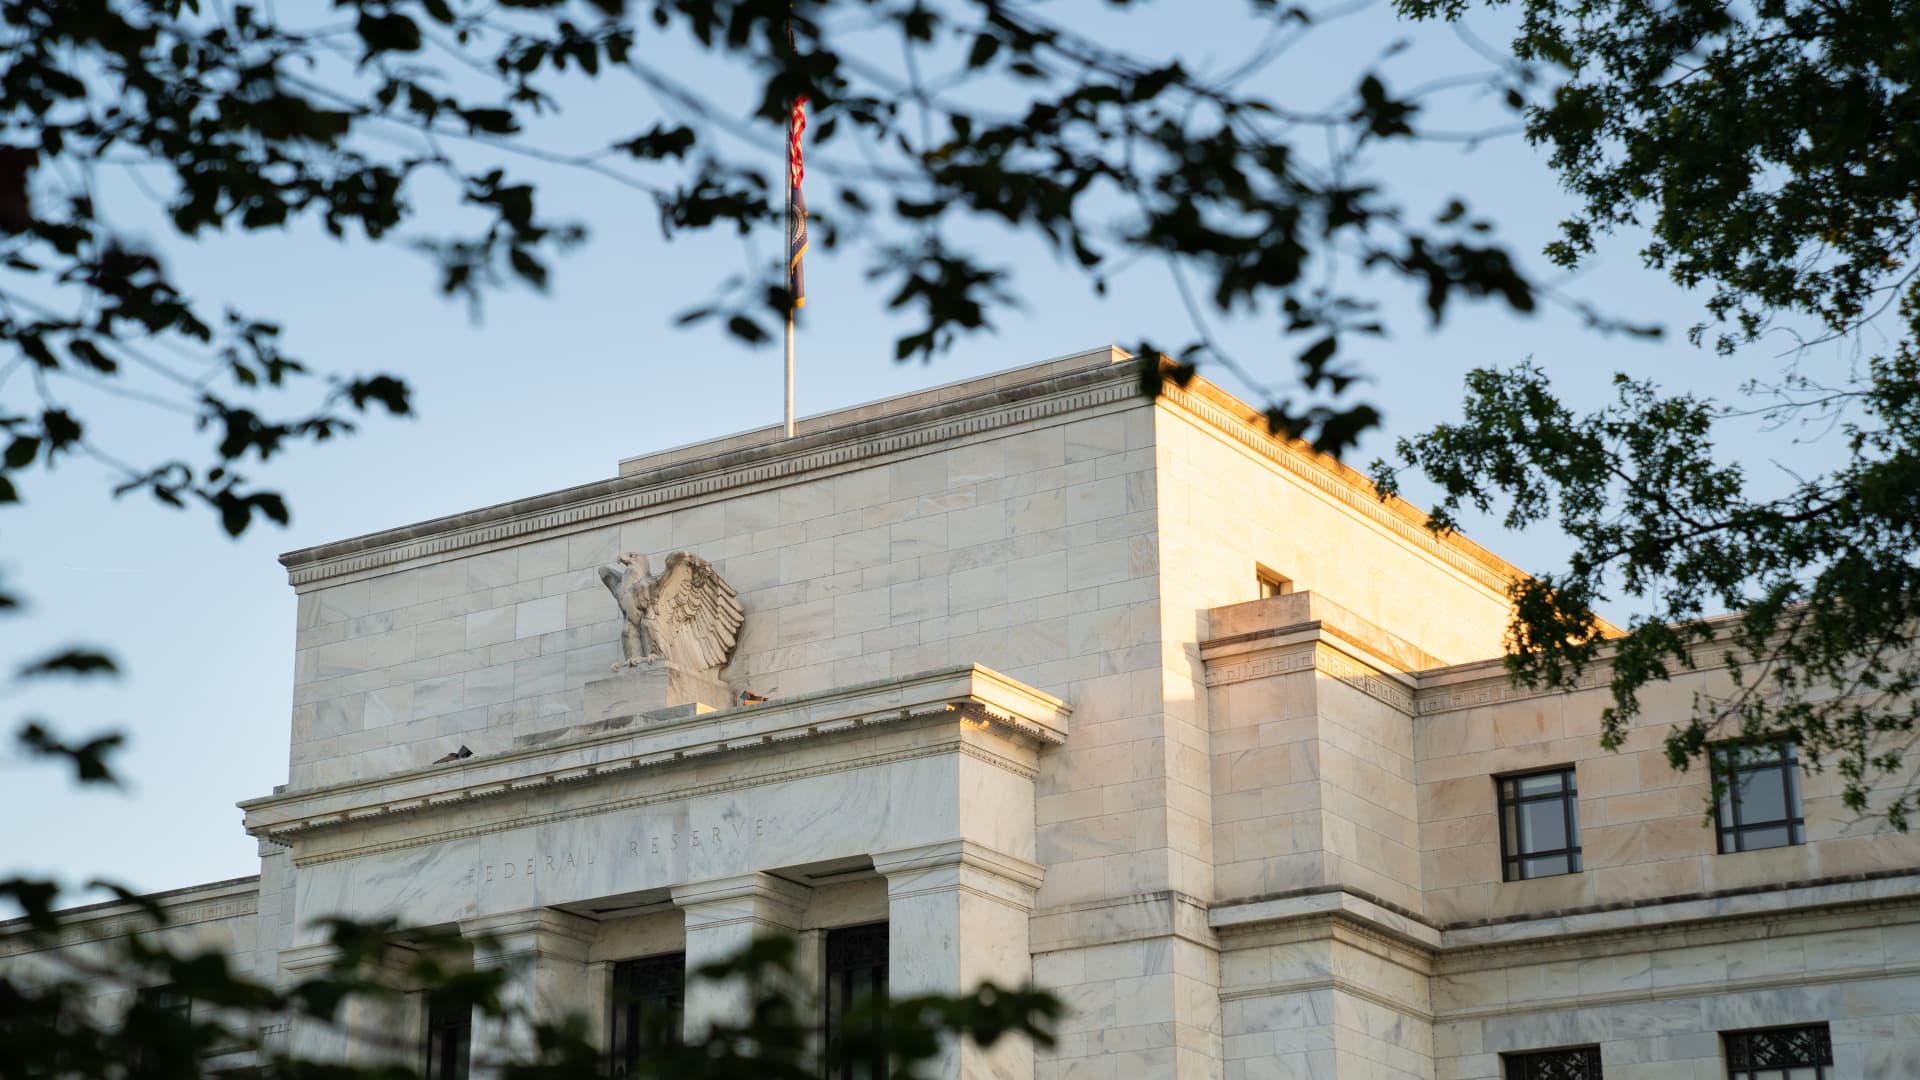 The Marriner S. Eccles Federal Reserve building stands in Washington, D.C., U.S., on Tuesday, Aug. 18, 2020.